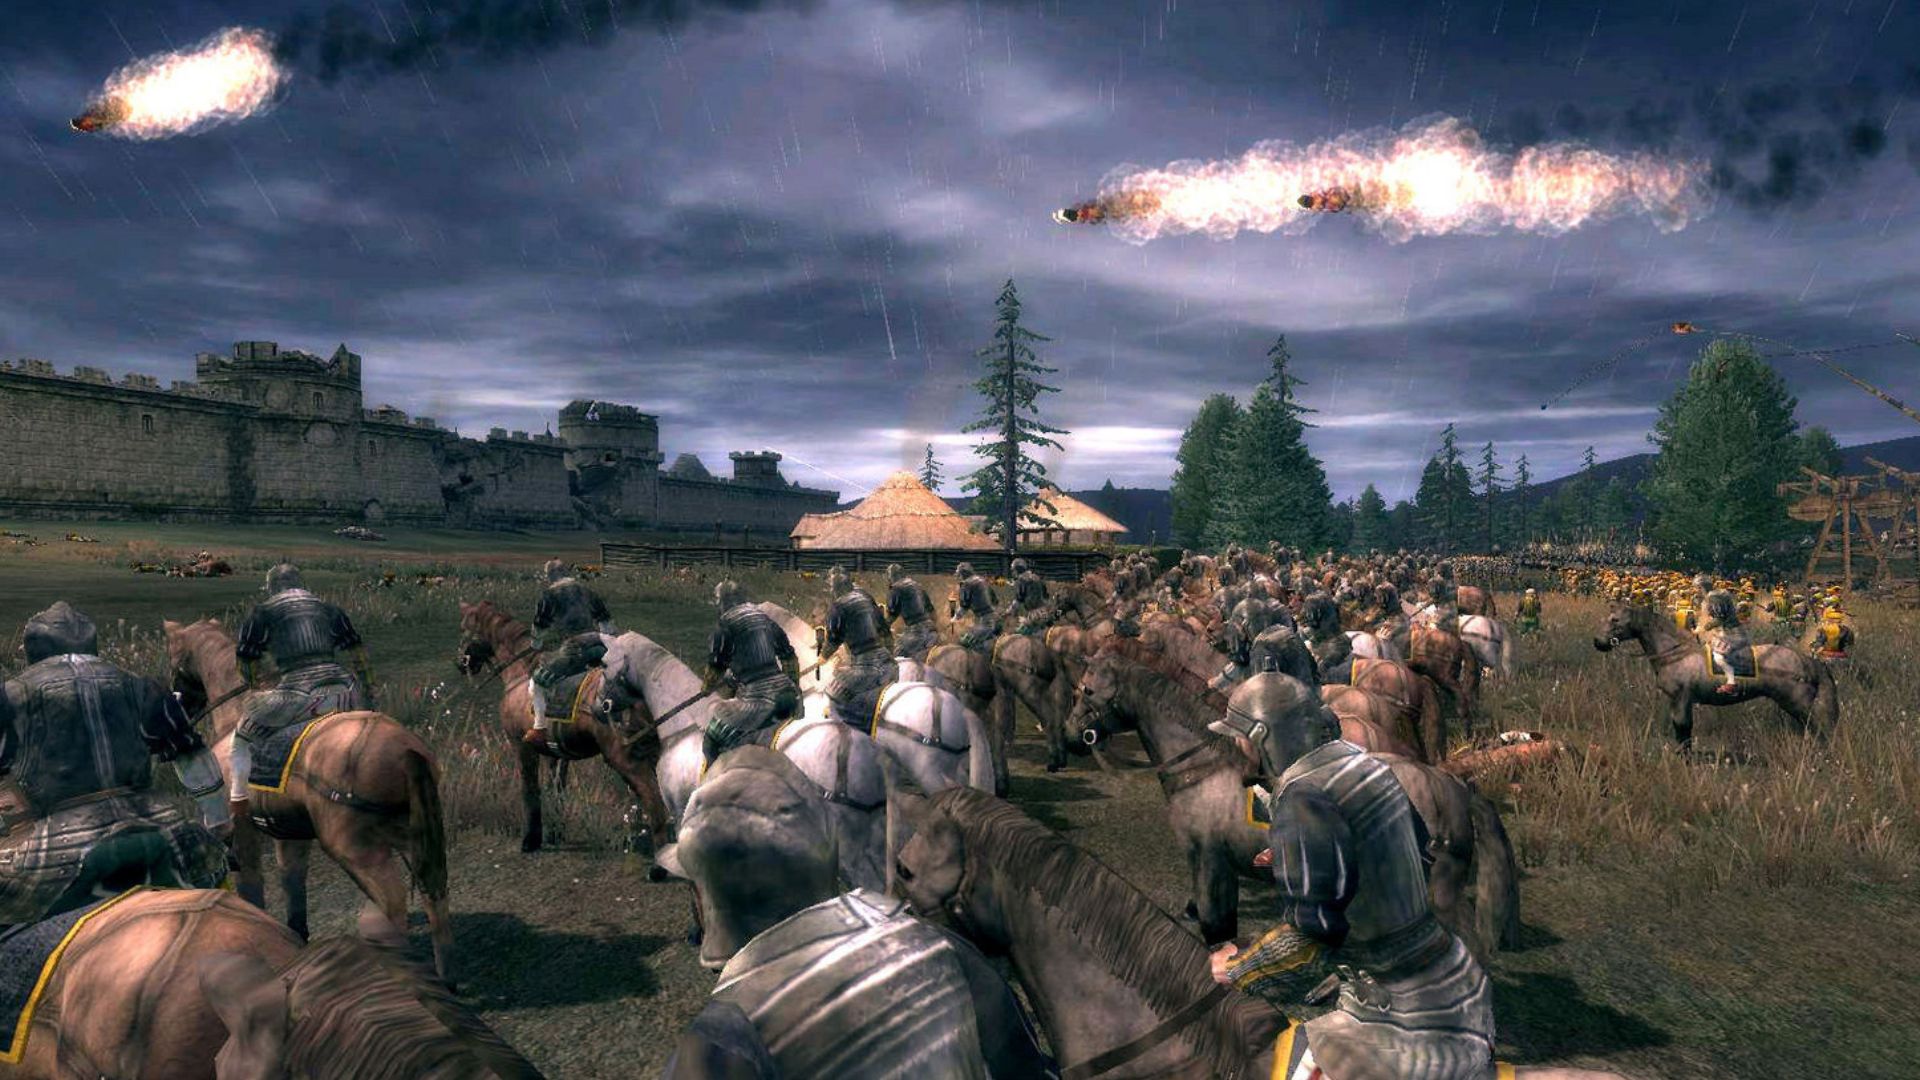 Best history games: Total War 2: Medieval. Image shows a medieval battle about to erup.